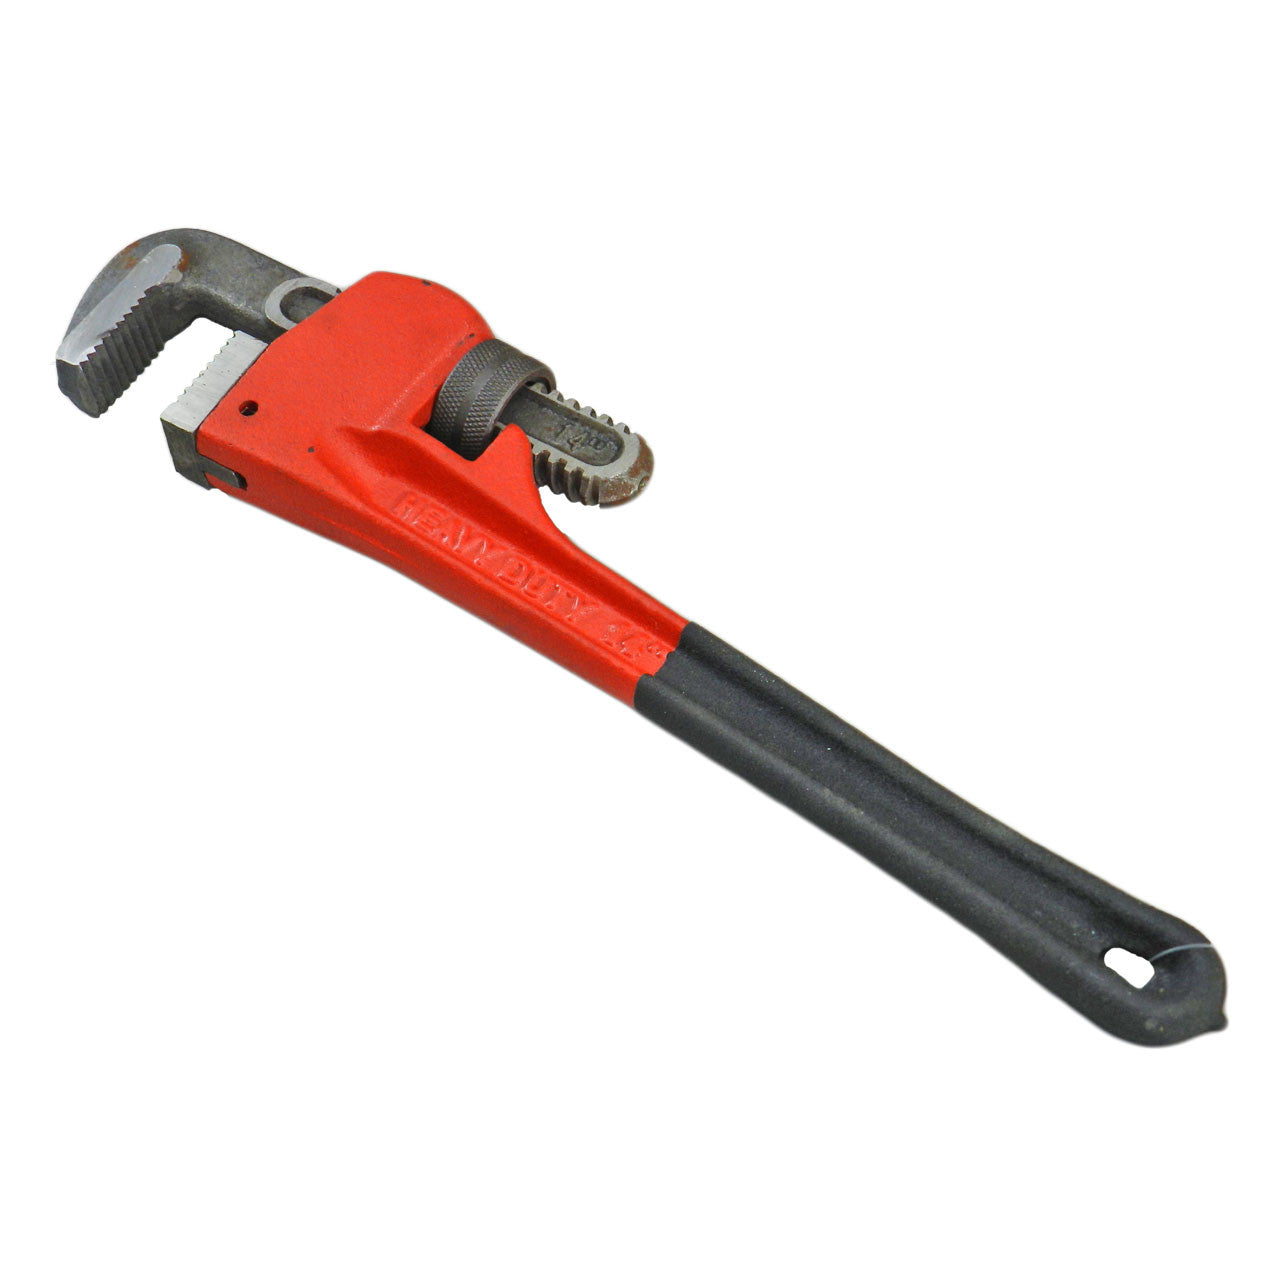 Pipe Wrench - Heavy Duty at Wholesale Pricing